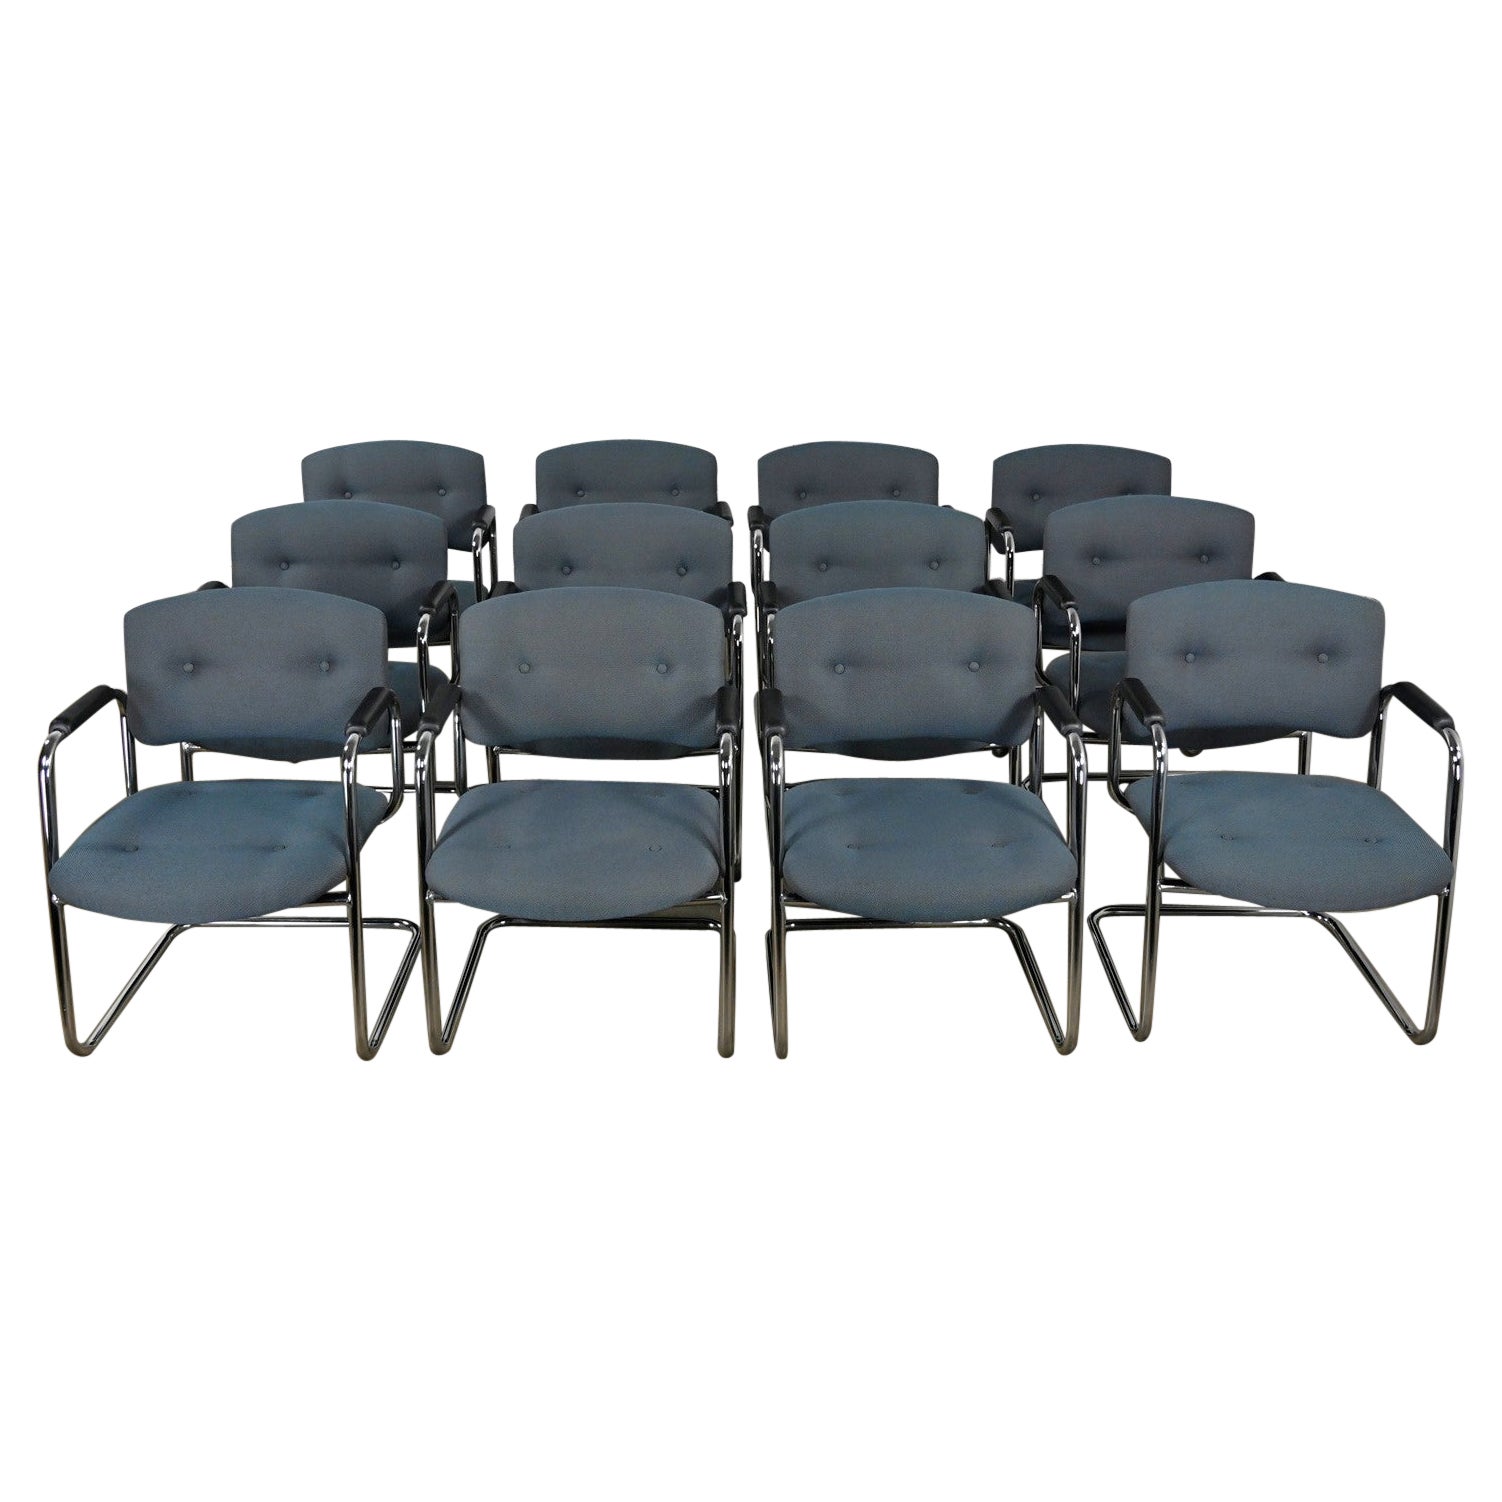 Late 20th Century Gray & Chrome Cantilever Chairs Style Steelcase Set of 12